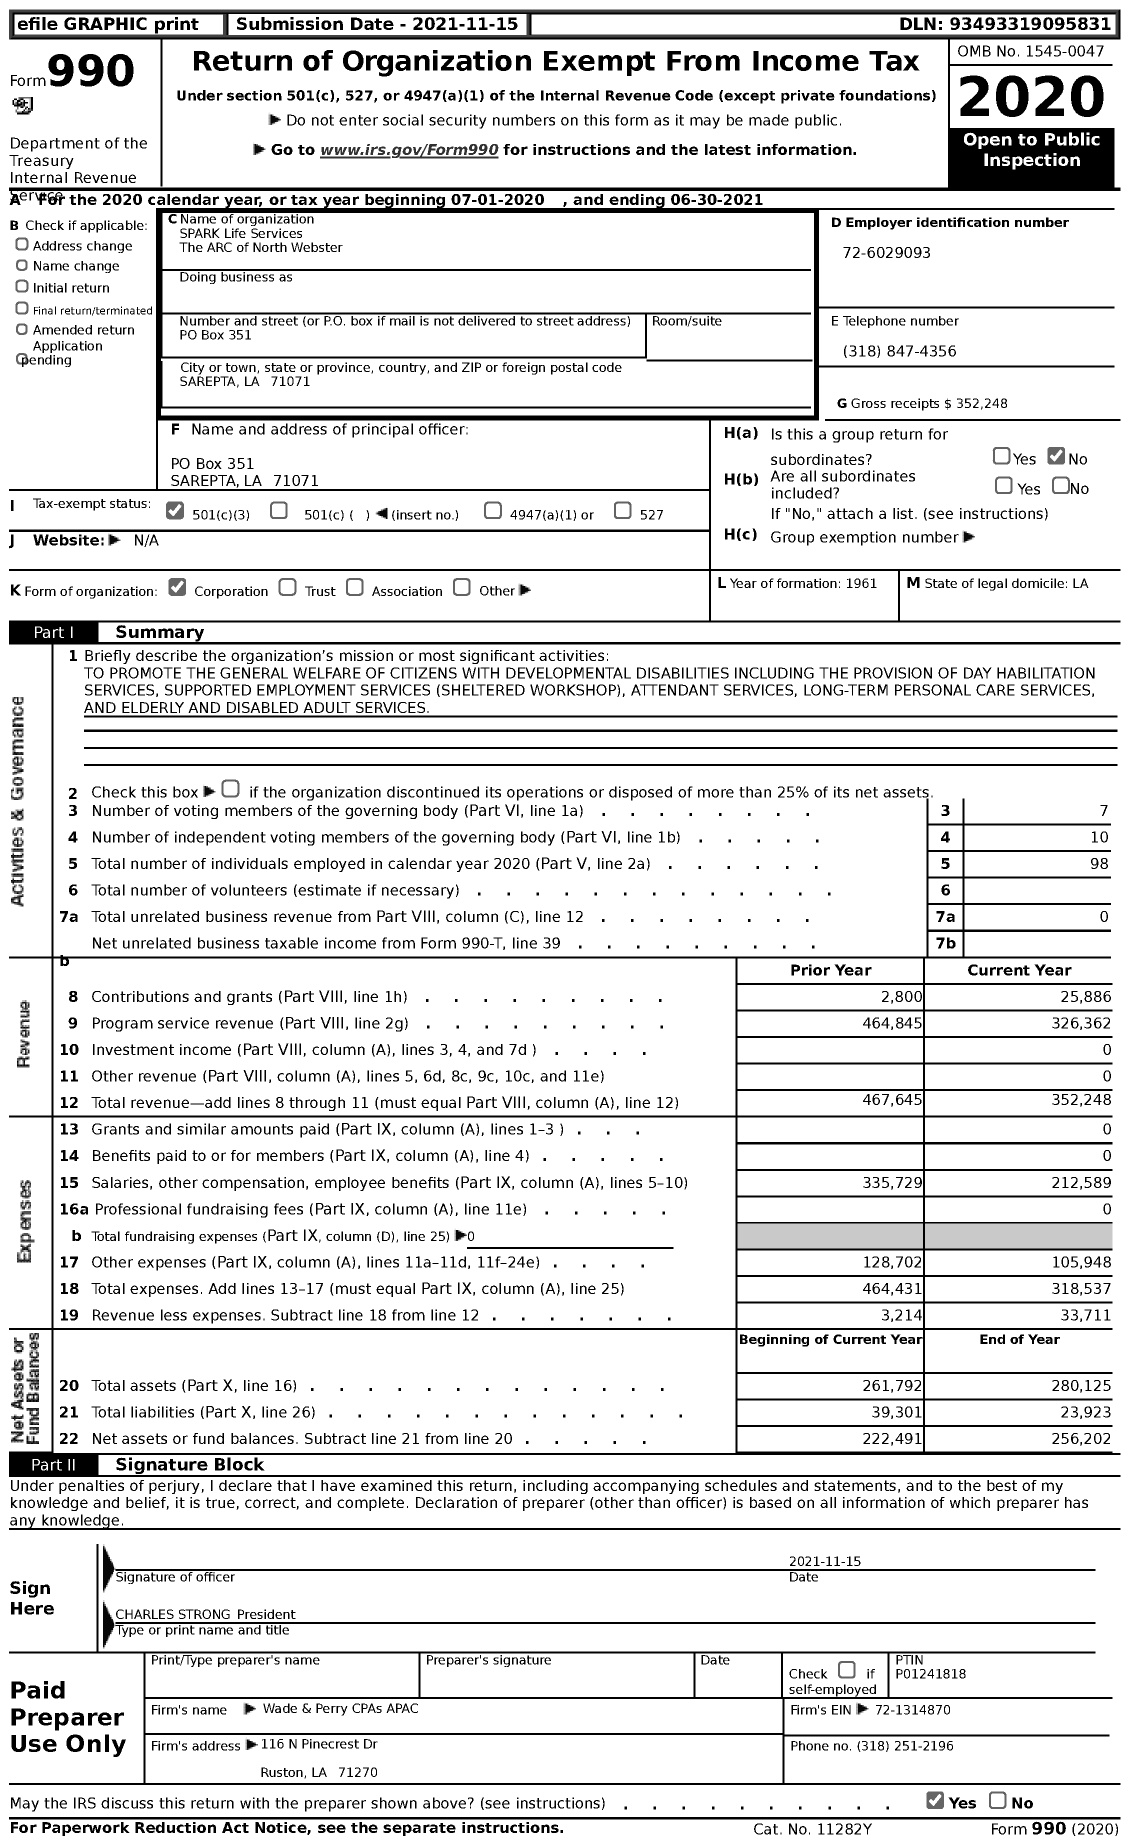 Image of first page of 2020 Form 990 for SPARK Life Services The ARC of North Webster